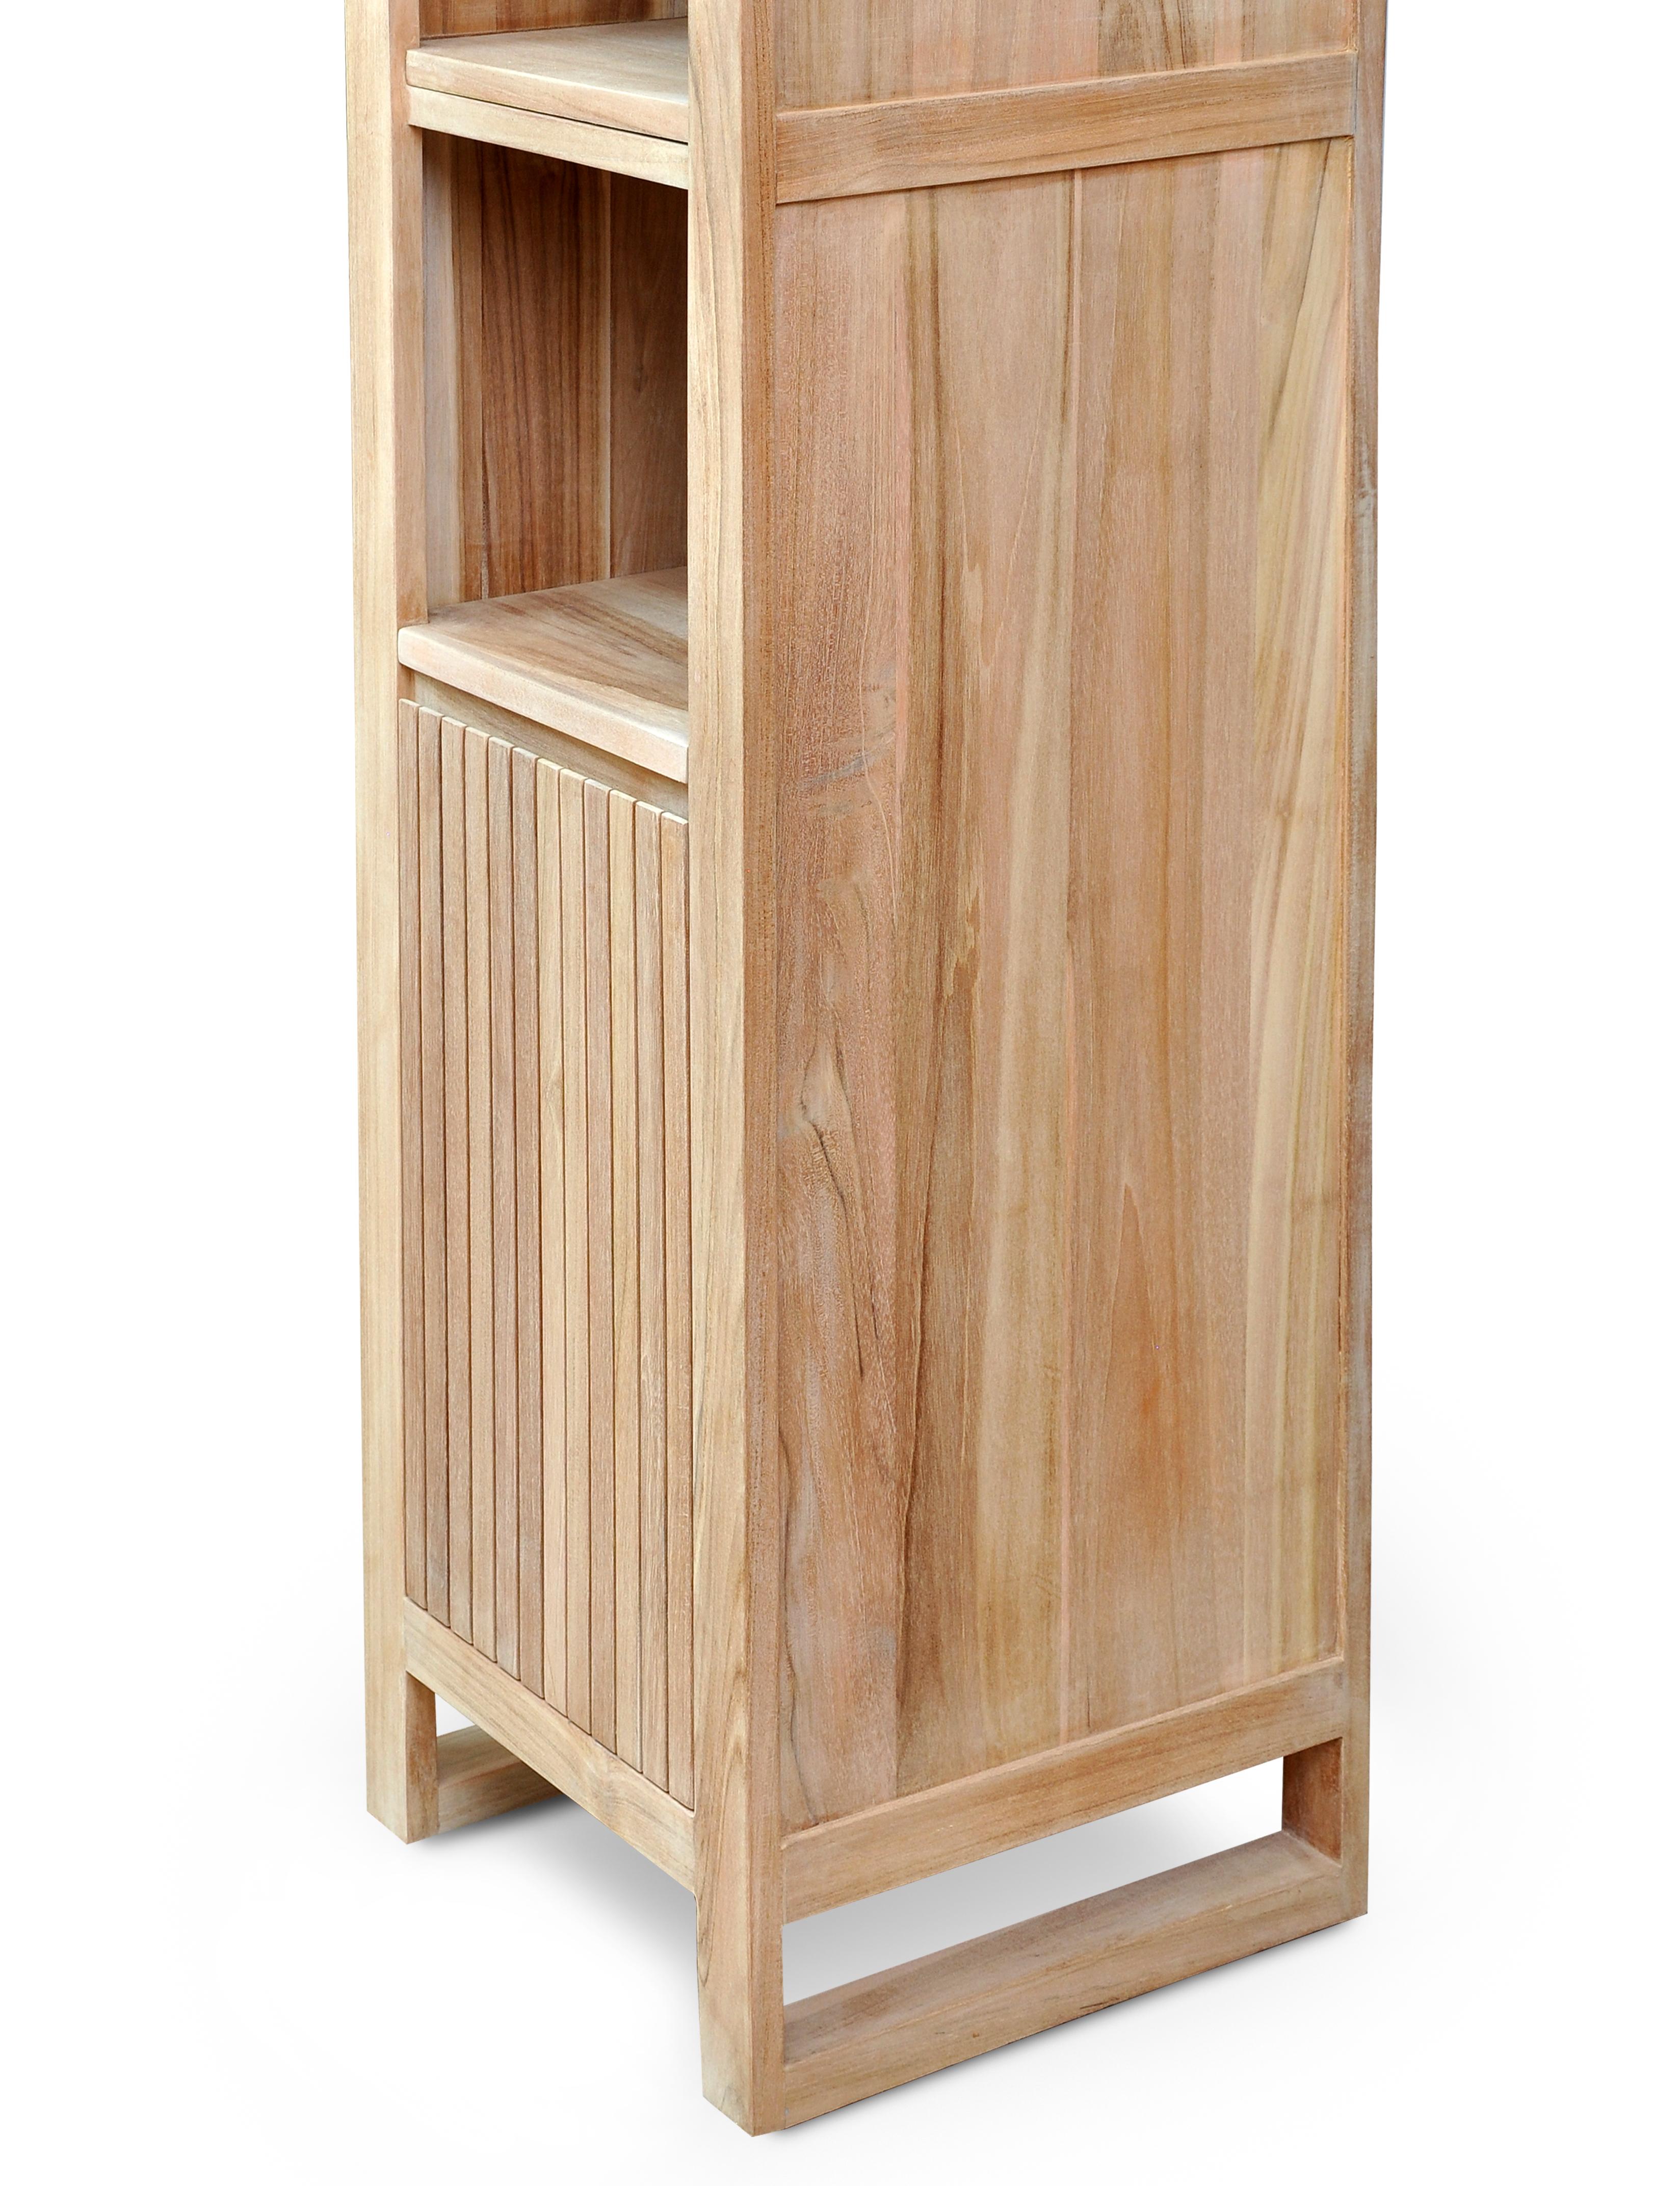 Bring the feeling of a spa to your own home with this beautiful, sustainably sourced teak column with vertical wood detail for your bathroom storage. Improve your life by bringing a sense of calm and organization to your space. The two doors are